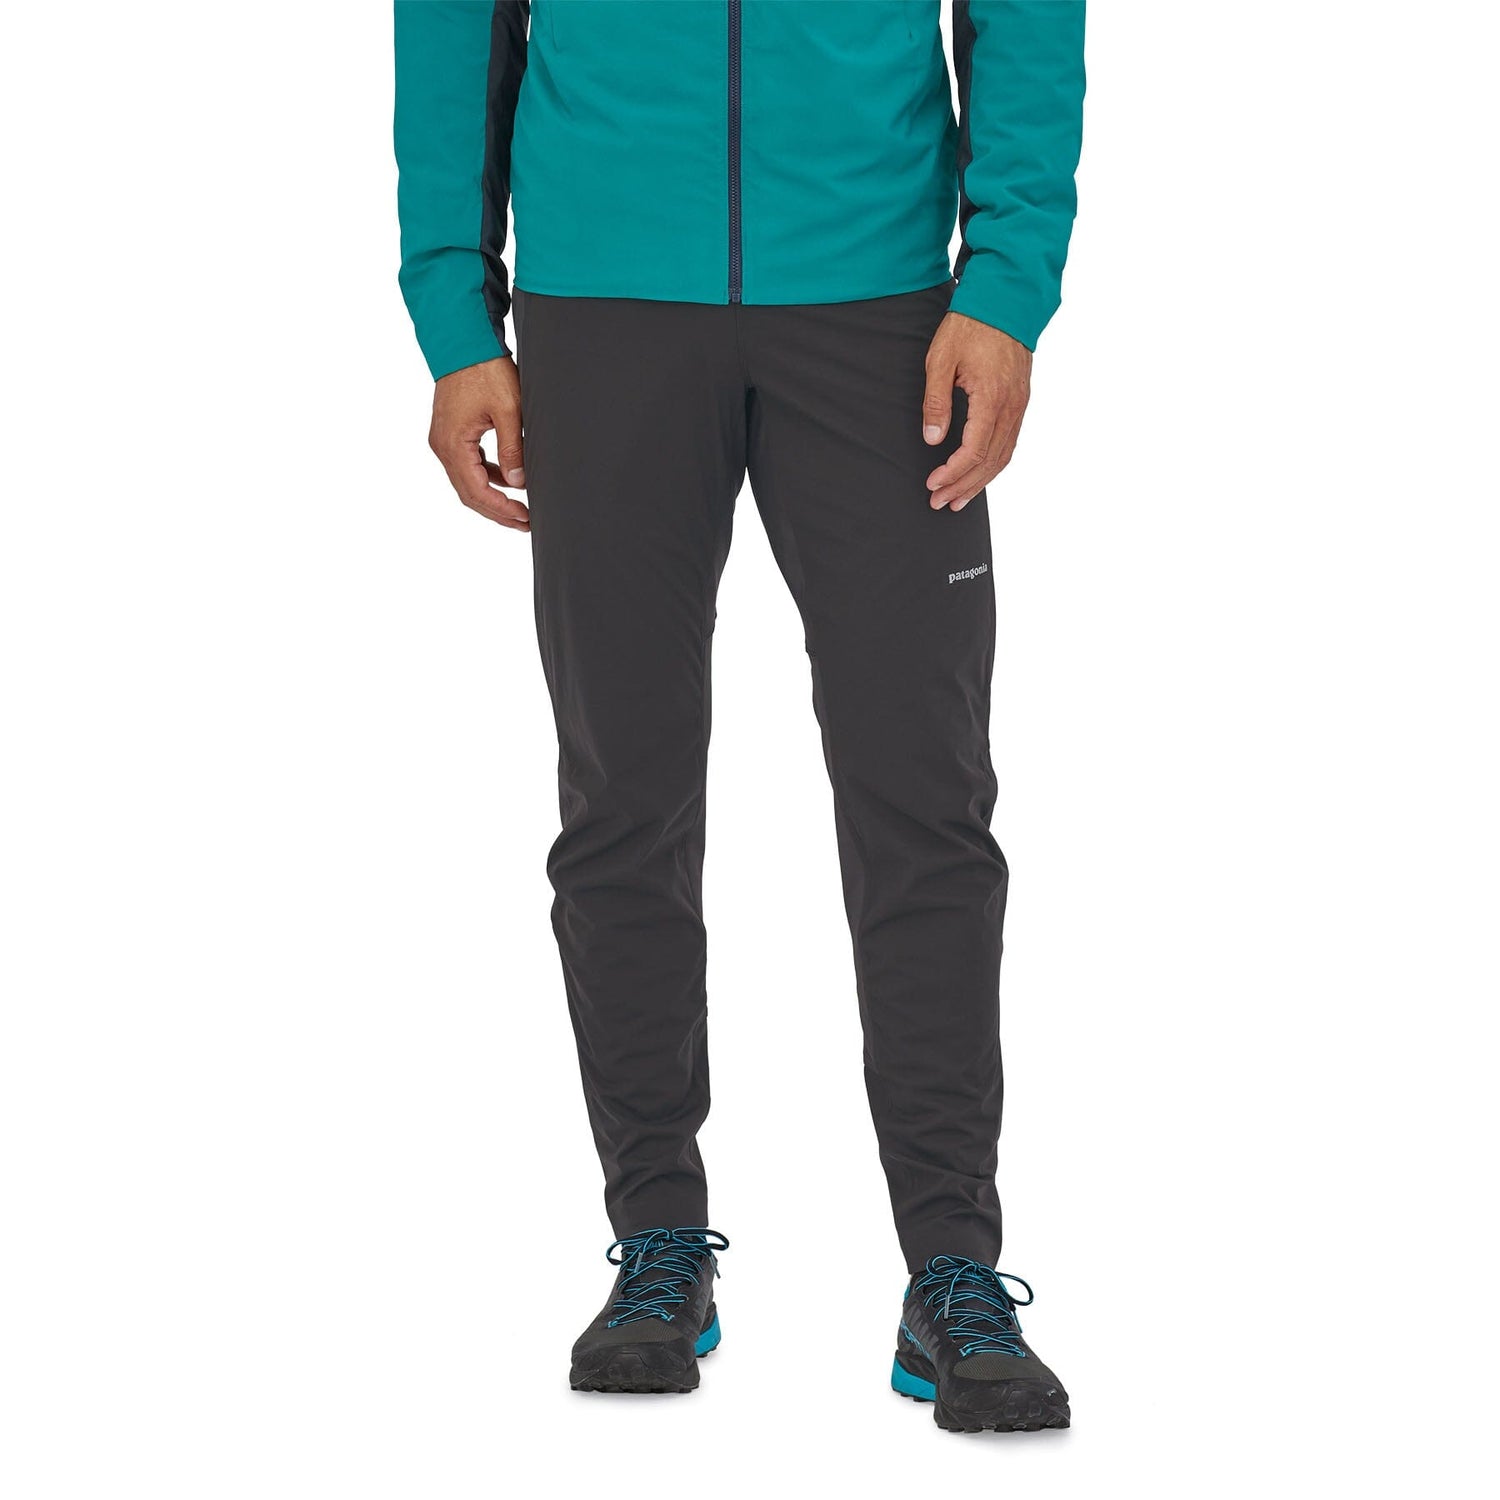 Patagonia - M's Wind Shield Pants - Recycled Polyester - Weekendbee - sustainable sportswear